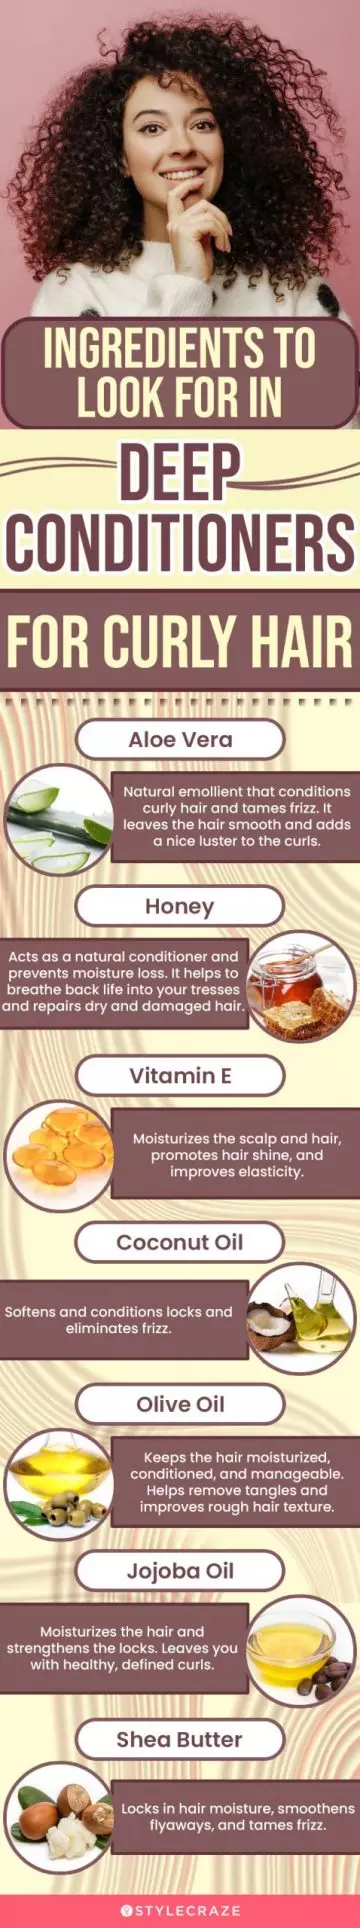 Ingredients To Look For In Deep Conditioners For Curly Hair(infographic)